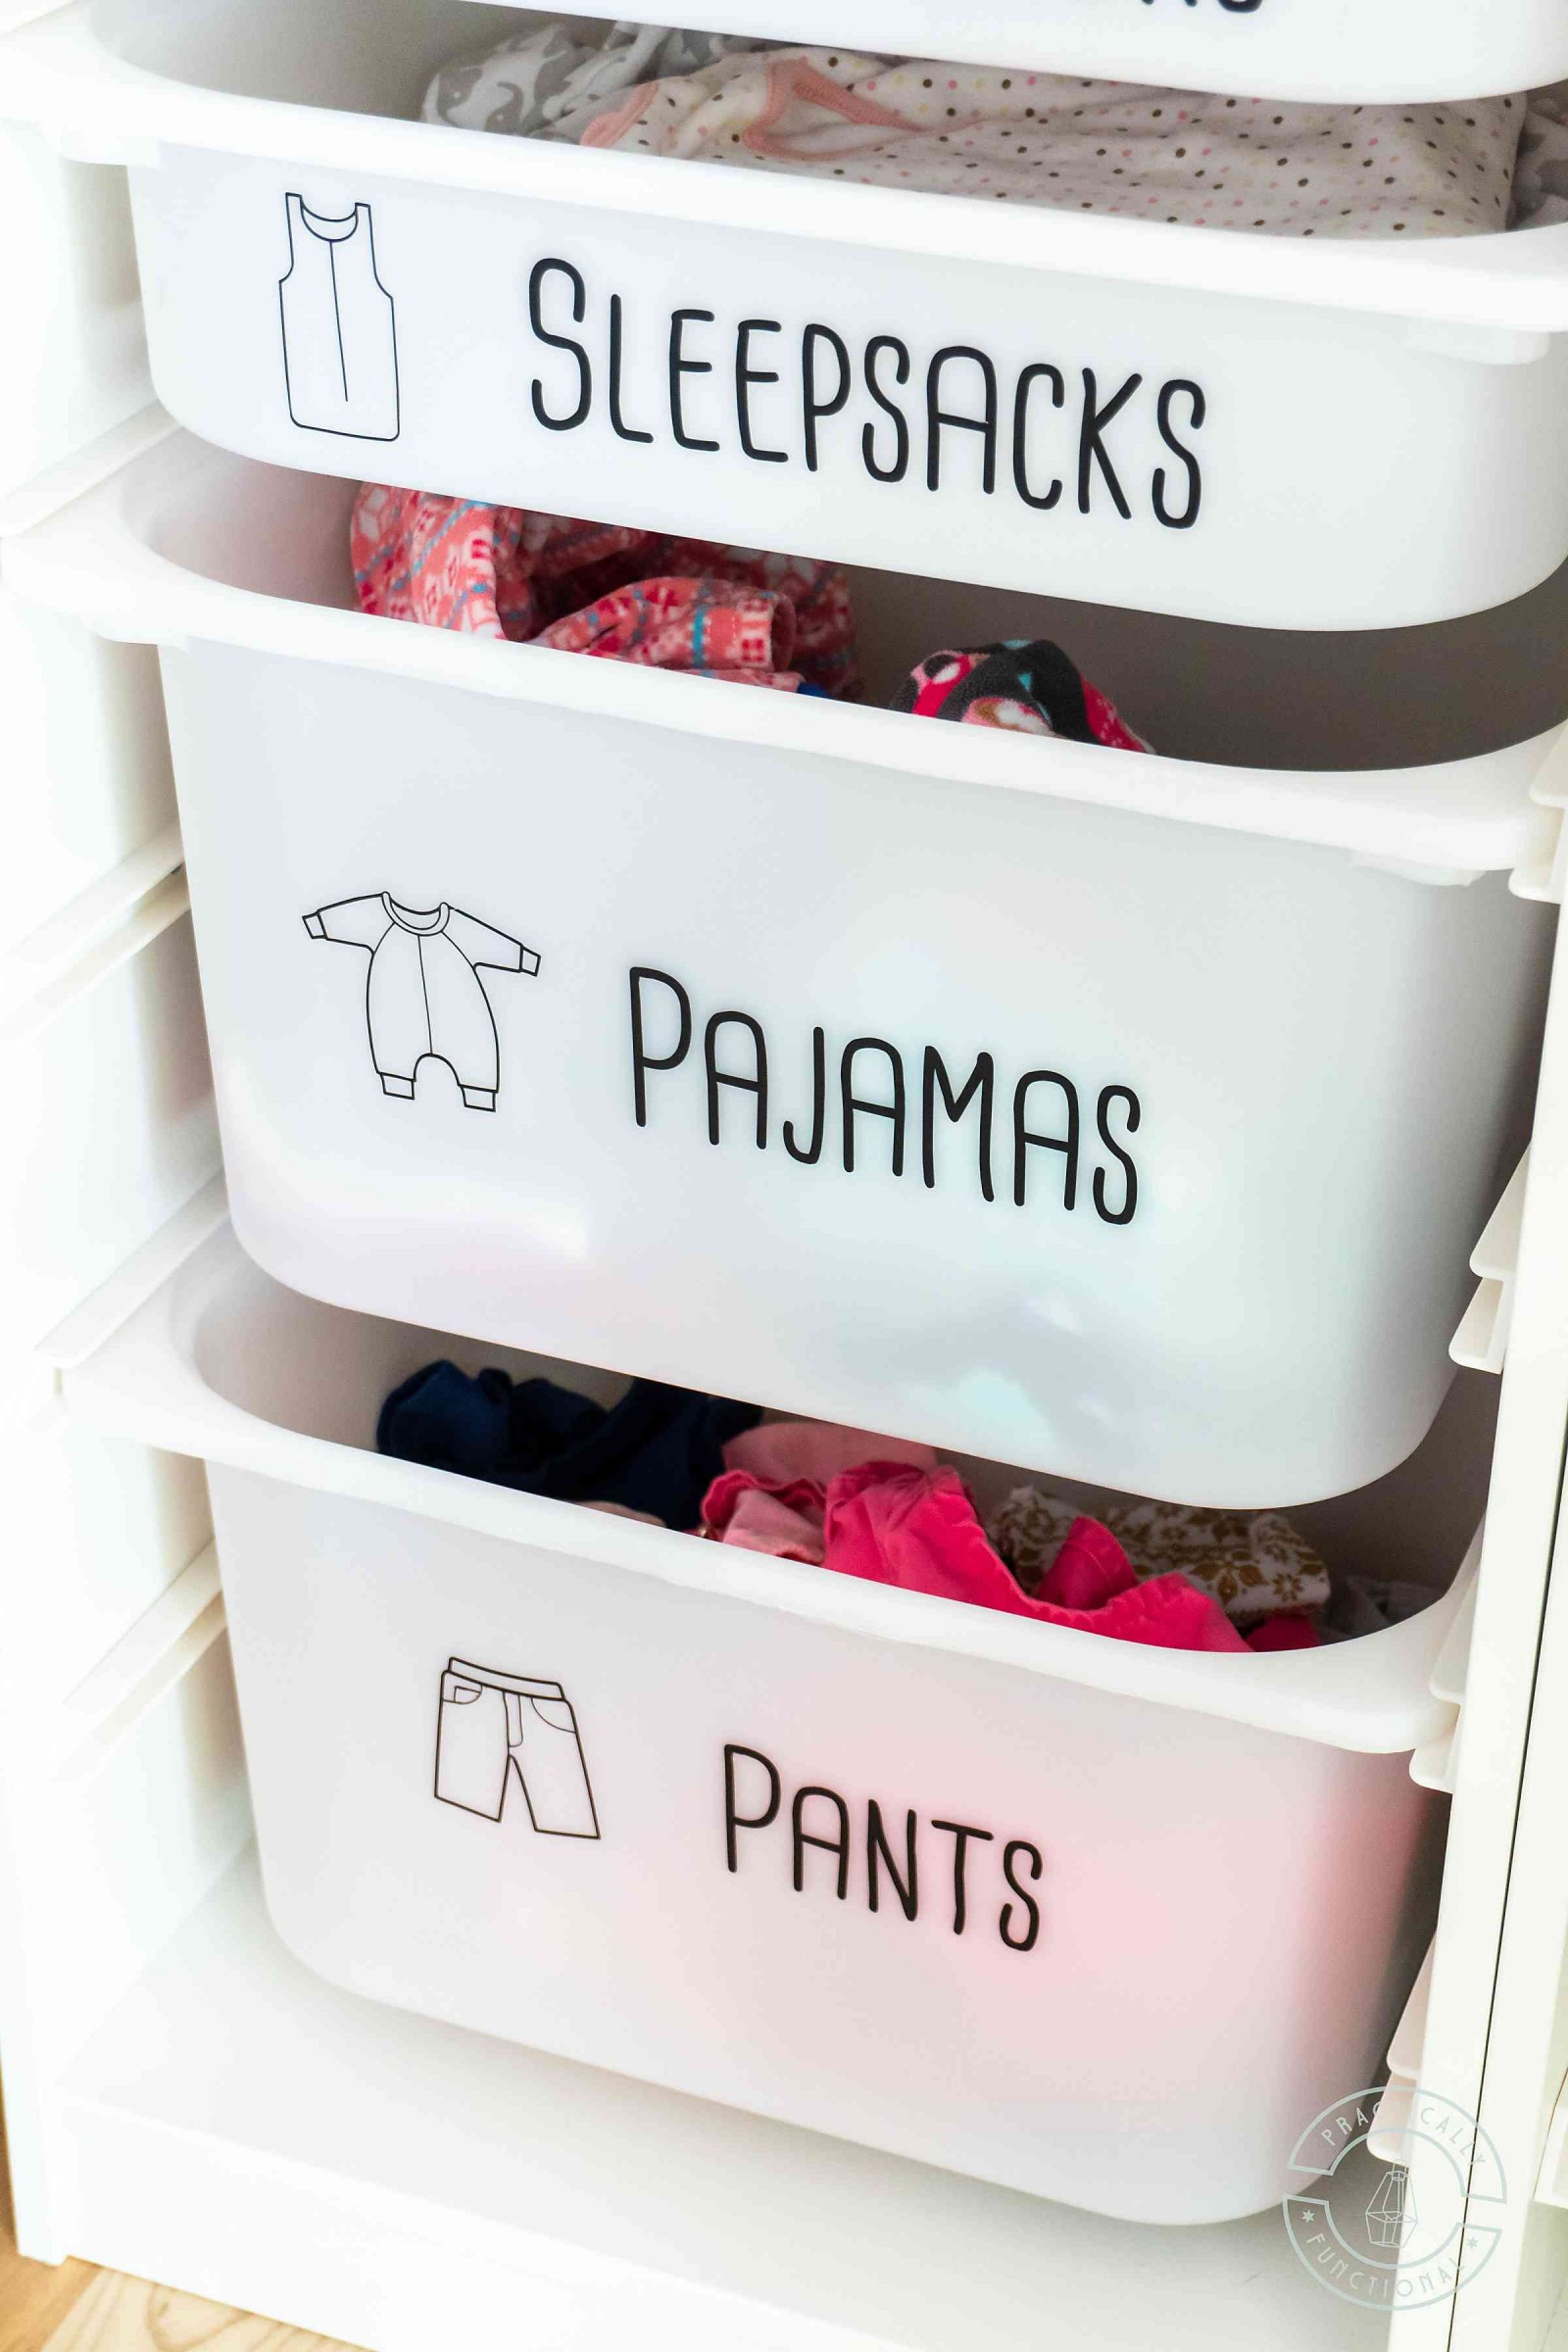 Label your drawers to easily locate stored items.